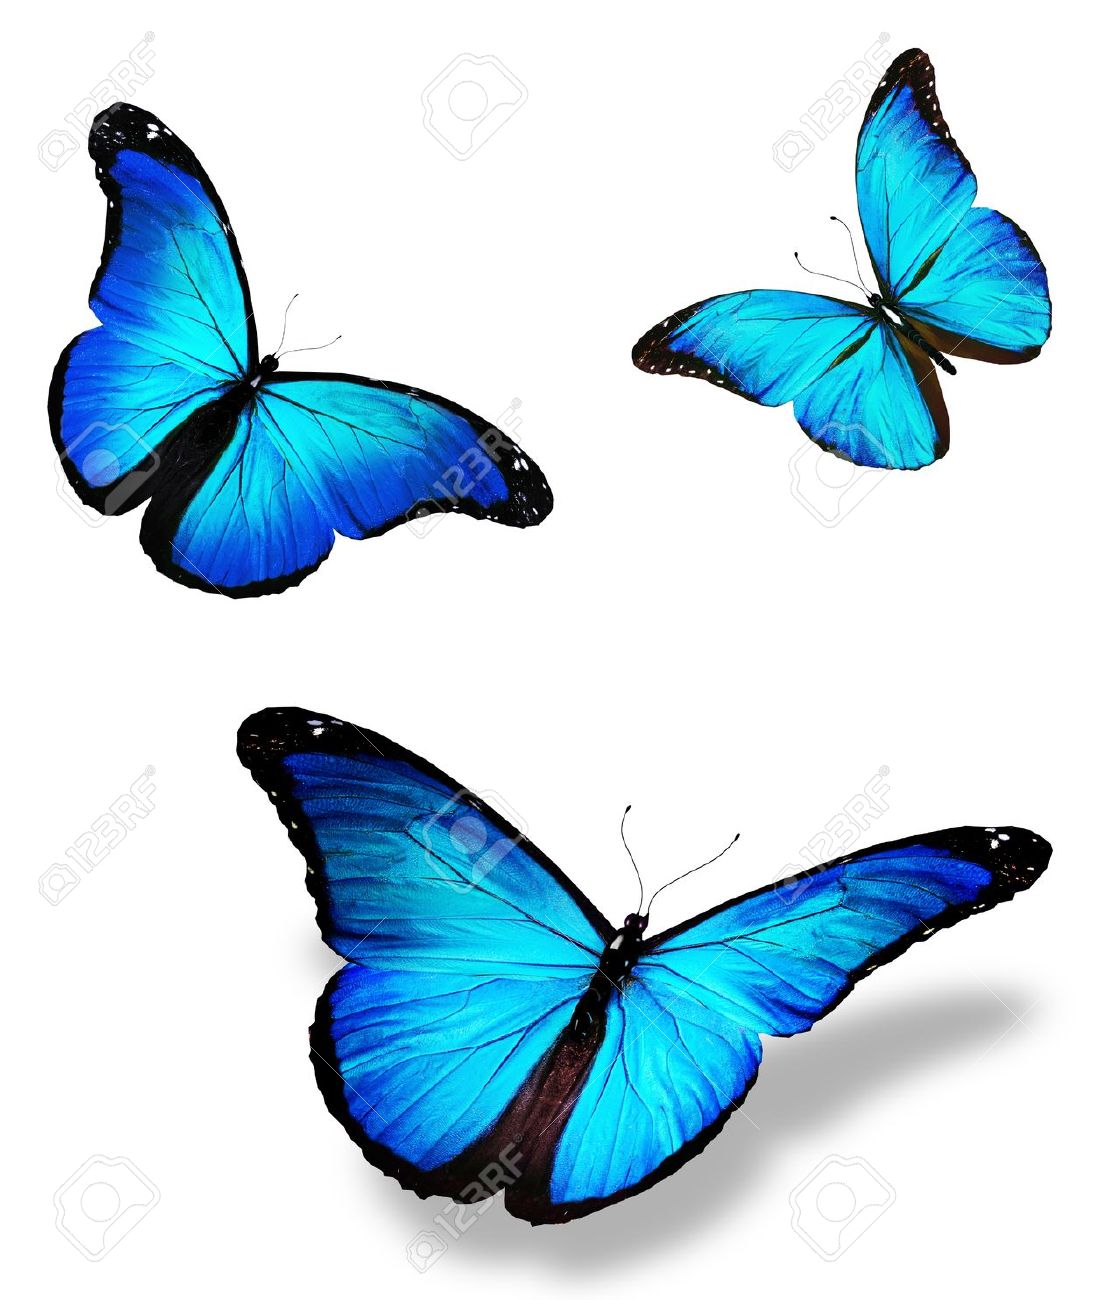 14424011-Three-blue-butterfly--Stock-Photo-flying